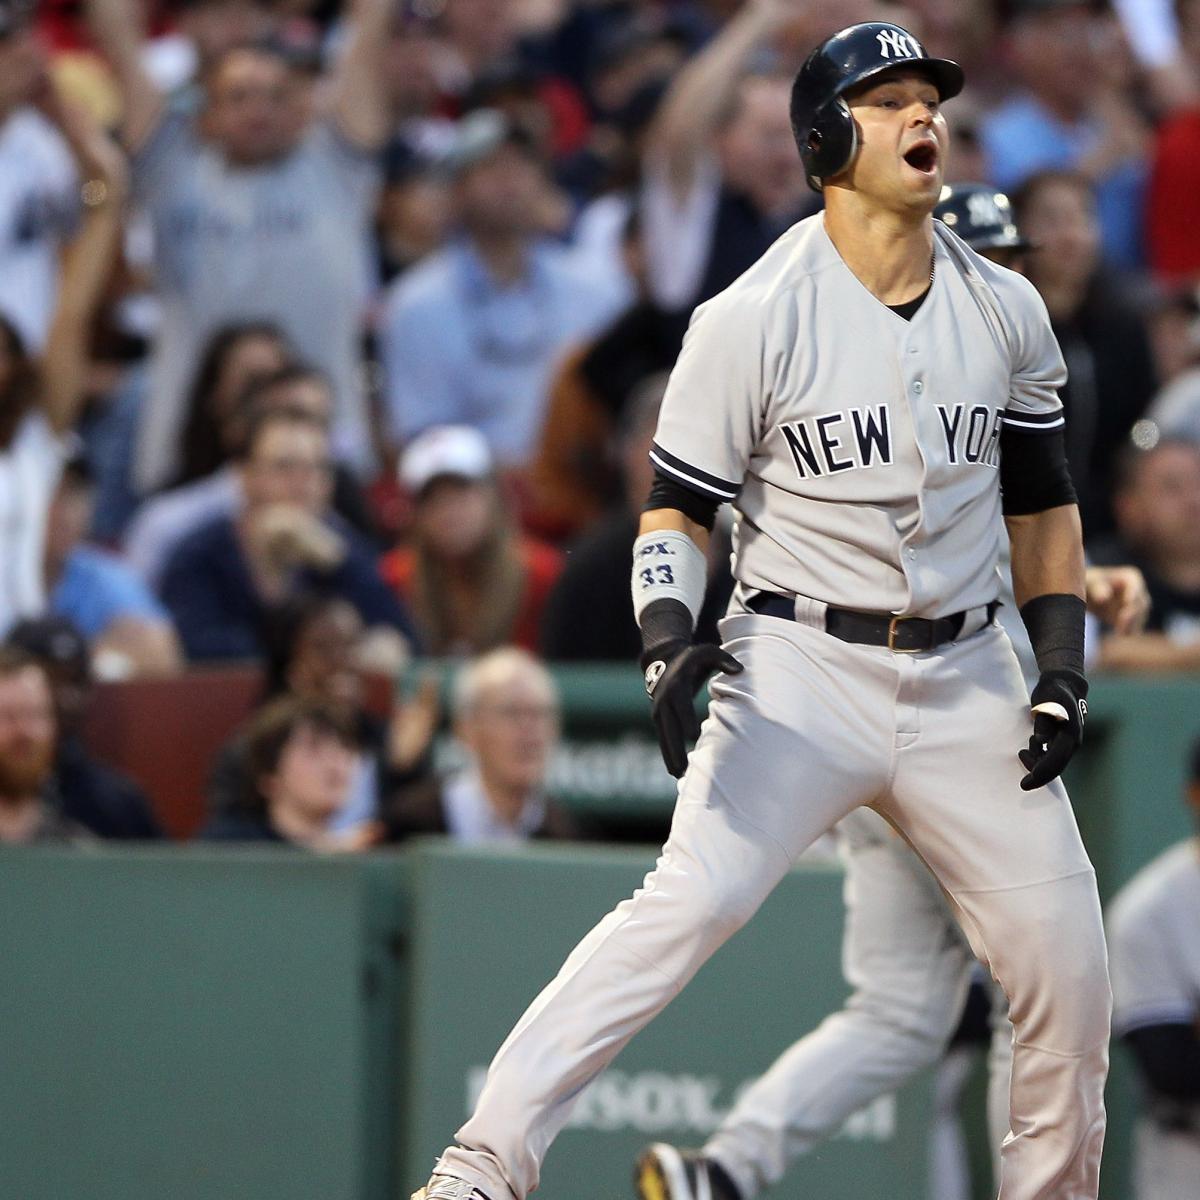 New York Yankees Free Agents Why Nick Swisher Should Take a "Hometown